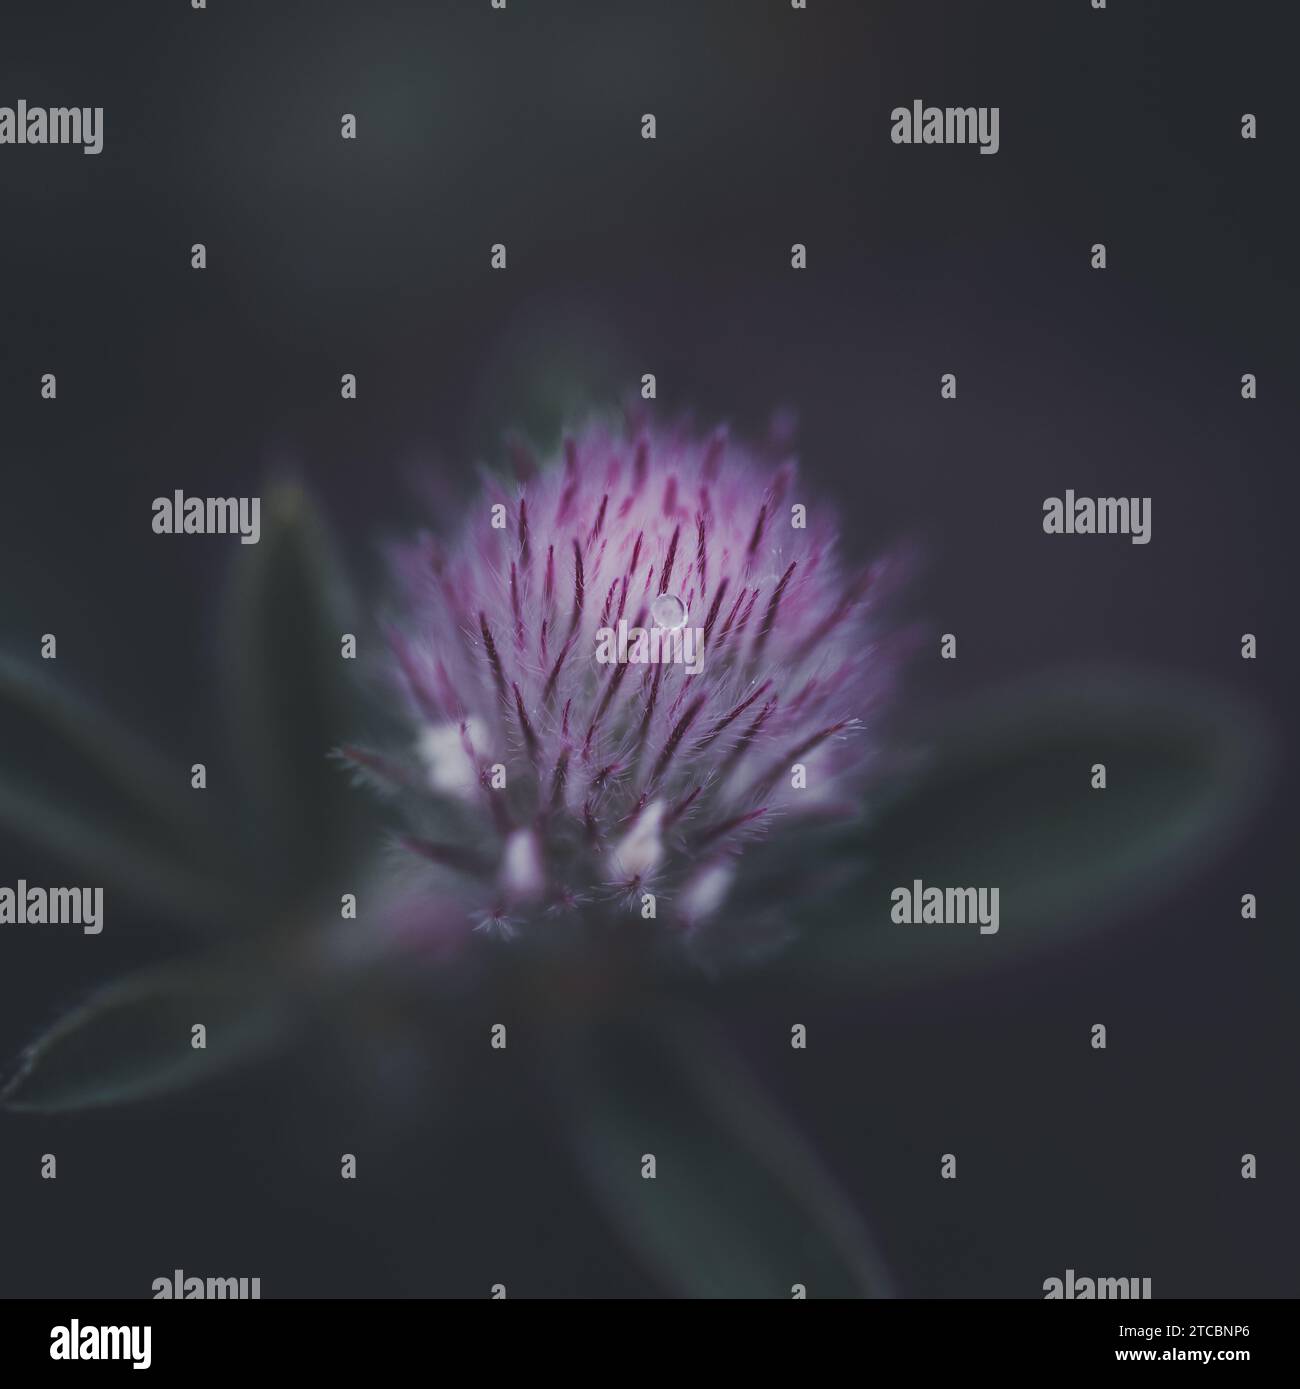 A vibrant purple thistle flower with dark green foliage set against a deep black background Stock Photo